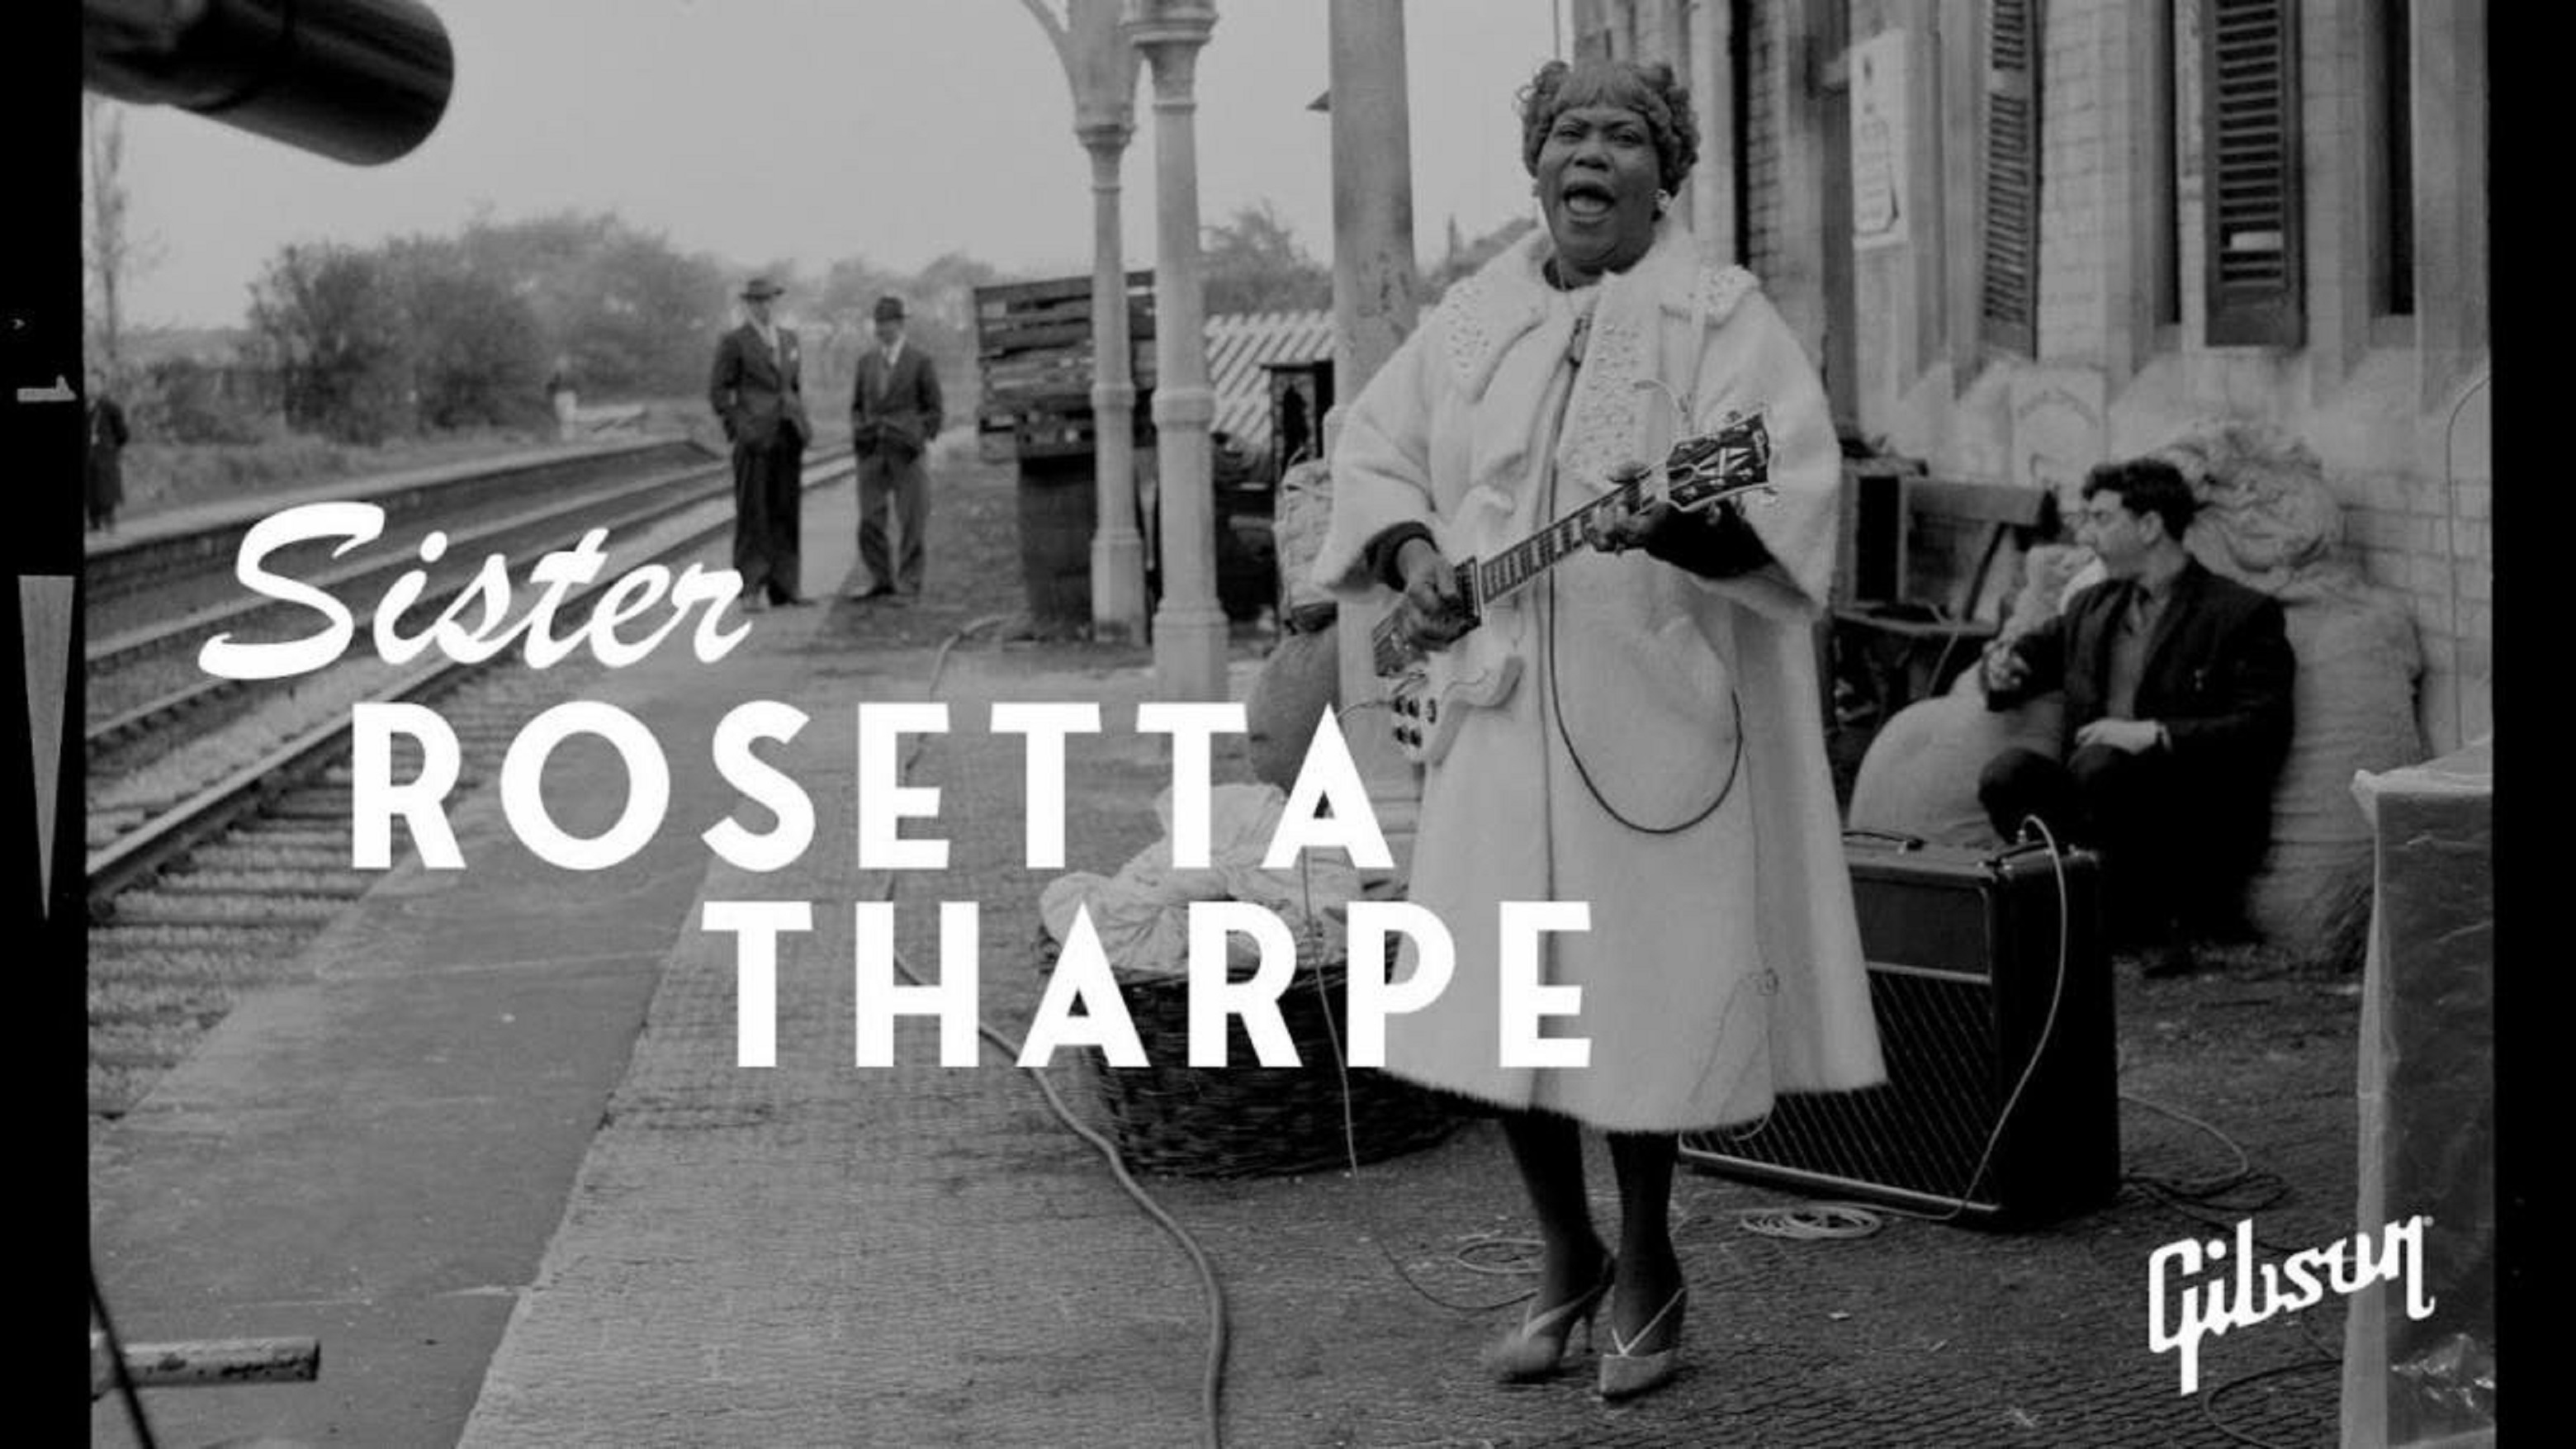 Sister Rosetta Tharpe Scholarship, Gibson Gives' Second Annual Music Scholarship in Honor of the Music Icon Awarded in Partnership With the Arkansas Arts Academy